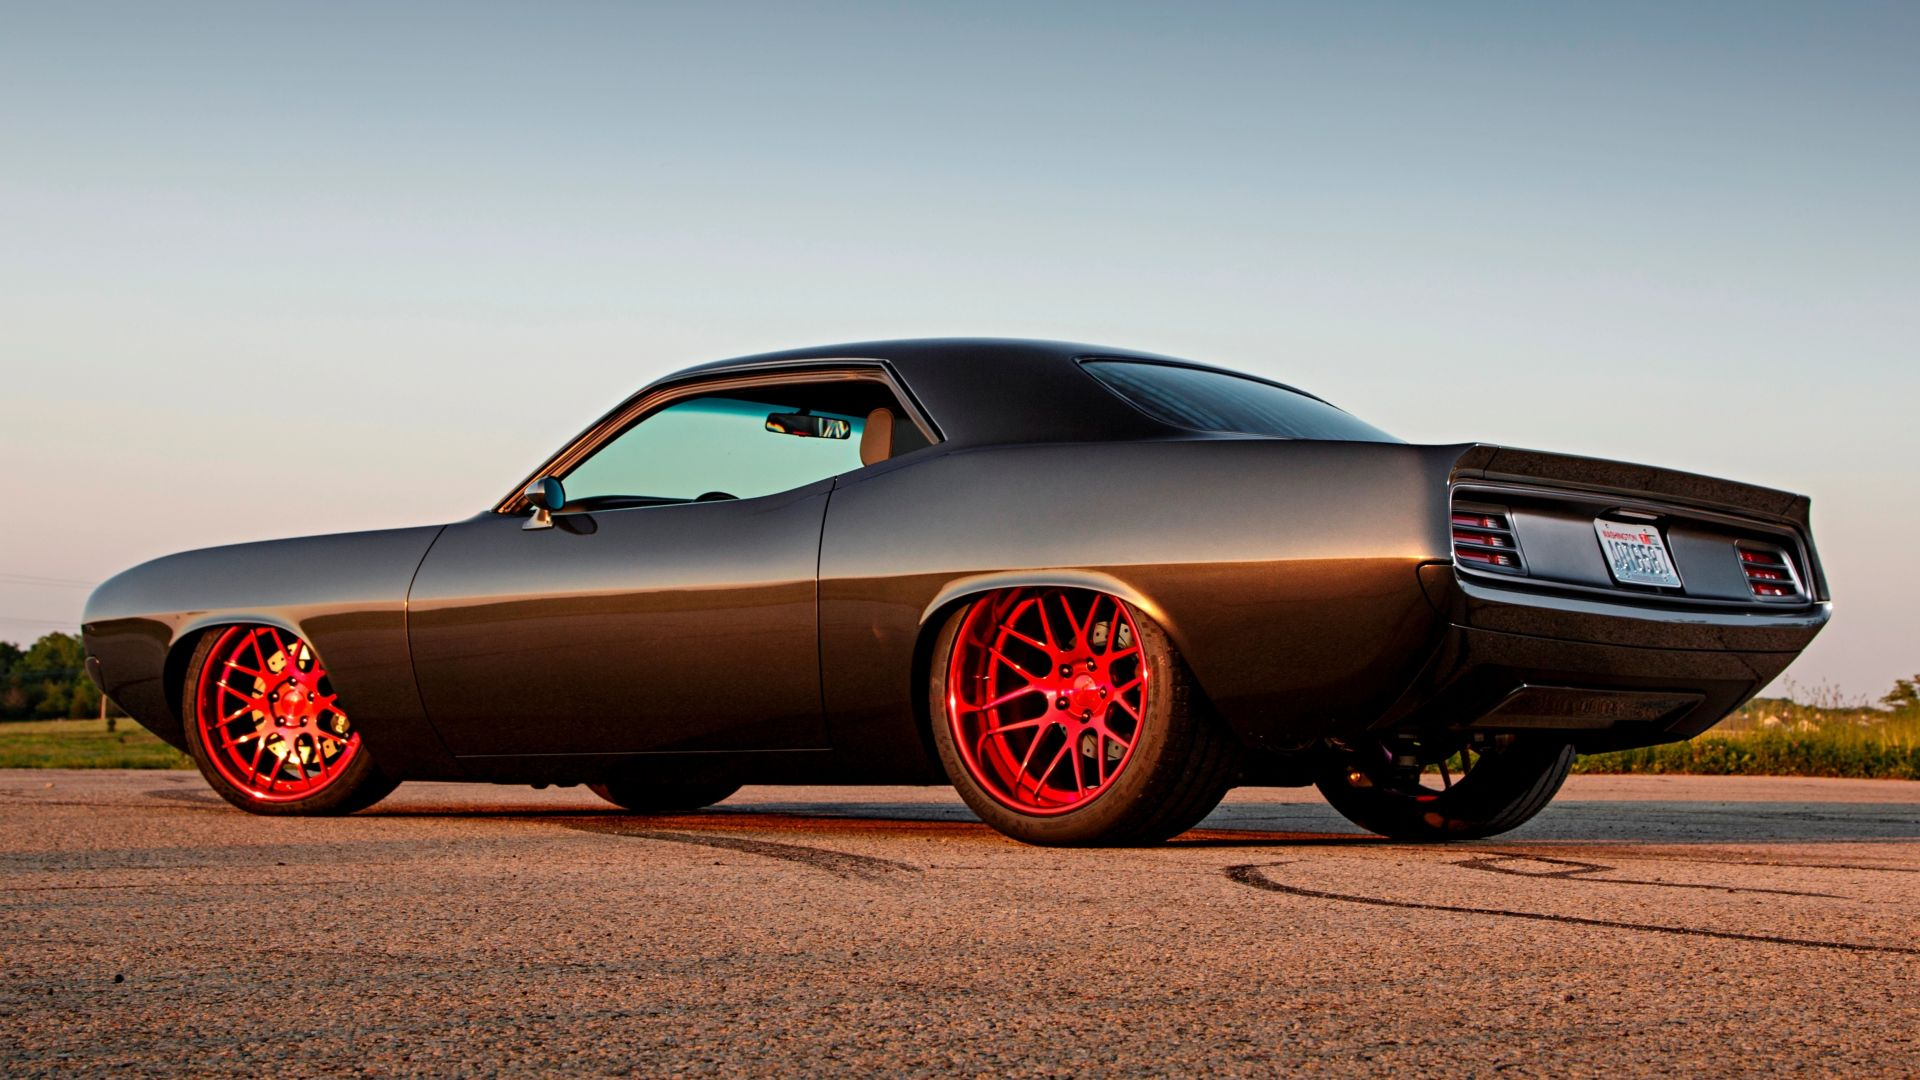 1920x1080 Desktop Wallpaper Black Plymouth Barracuda, Muscle Car, Hd Image, Picture, Background, 70213e